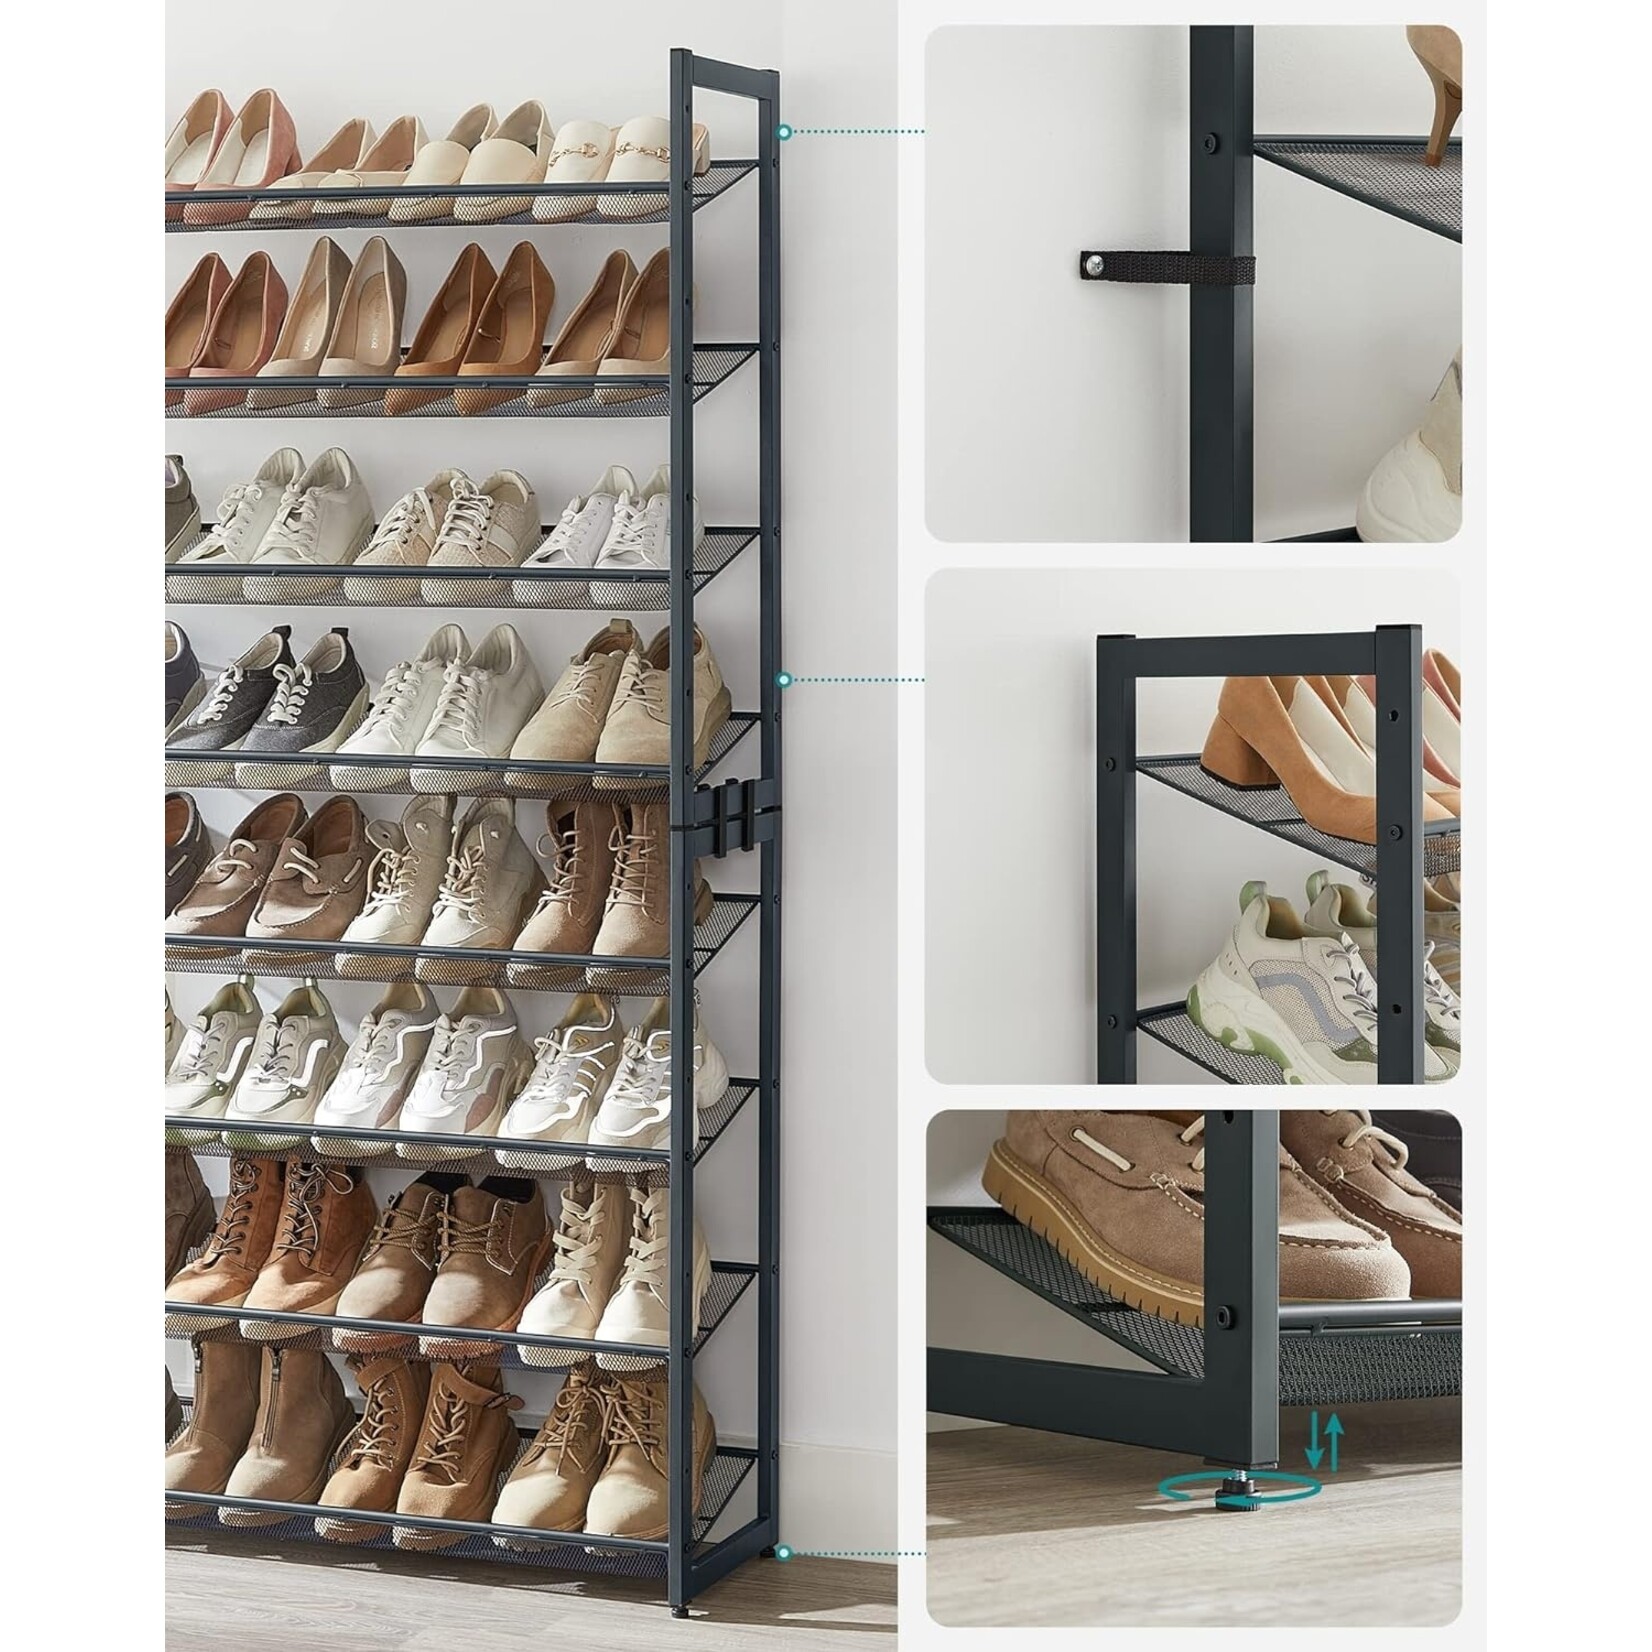 Bobbel Home Dok Home - Shoe rack - With 8 shelves - For 32 to 40 pairs of shoes - Gray